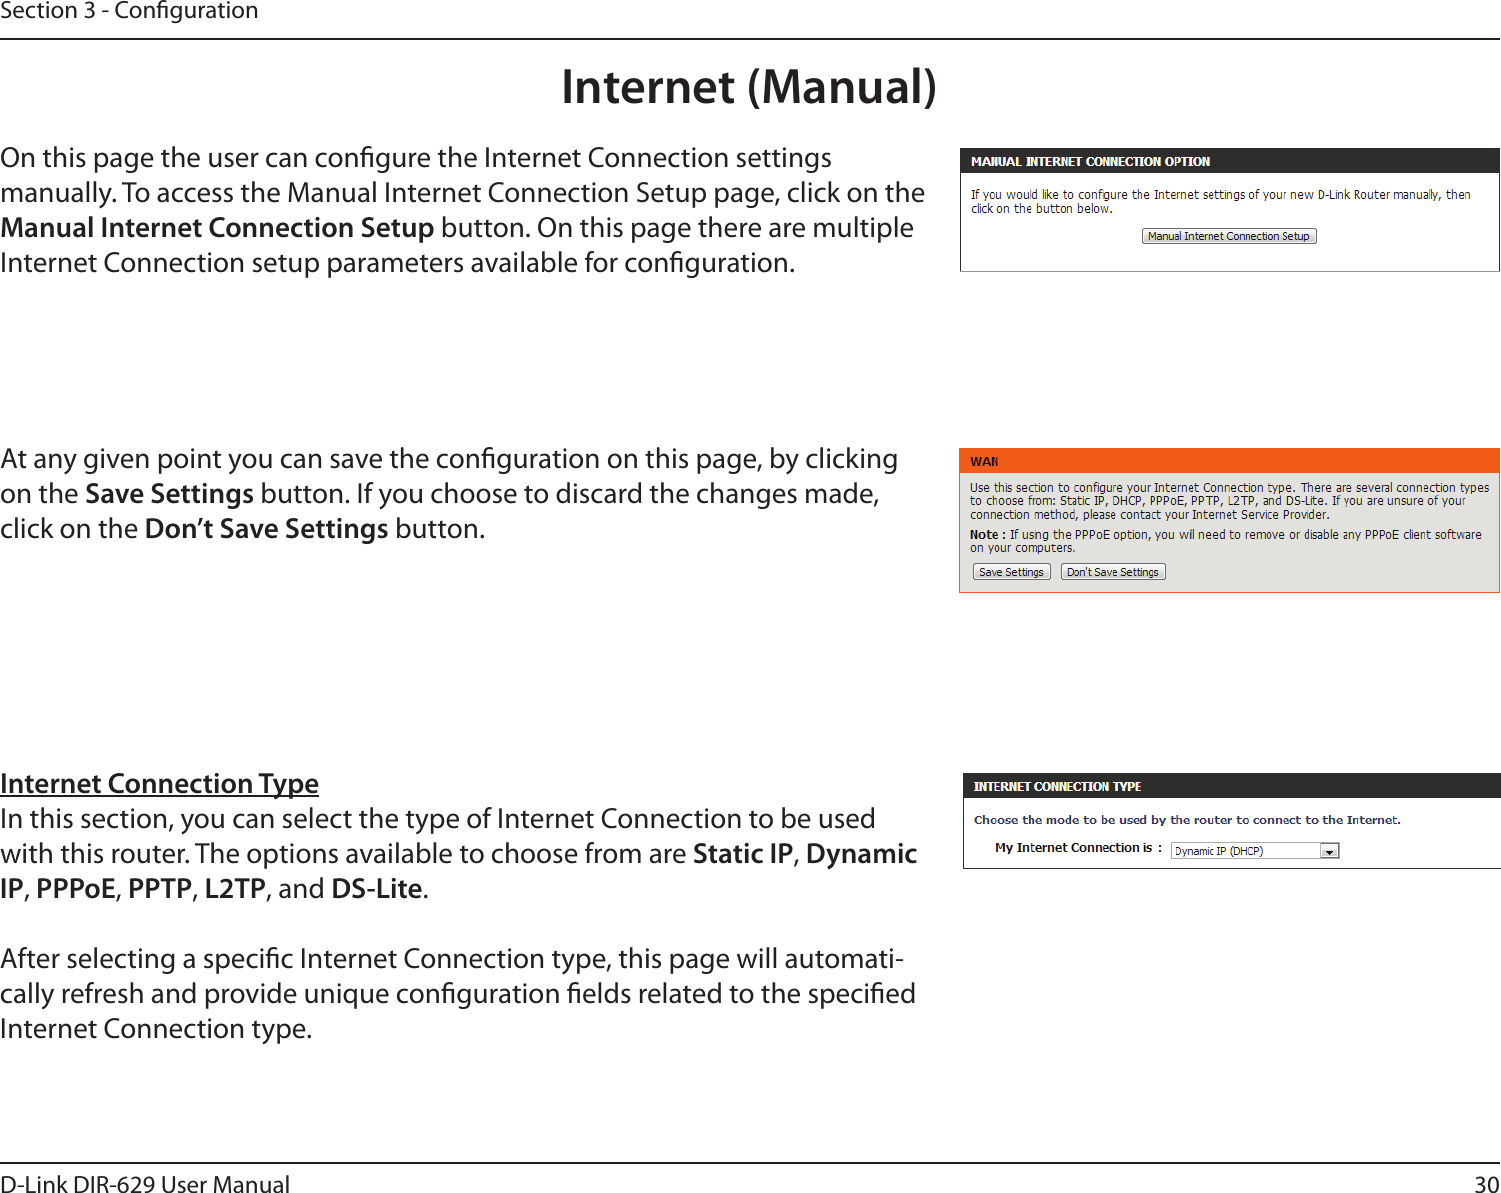 30D-Link DIR-629 User ManualSection 3 - CongurationInternet (Manual)On this page the user can congure the Internet Connection settings manually. To access the Manual Internet Connection Setup page, click on the Manual Internet Connection Setup button. On this page there are multiple Internet Connection setup parameters available for conguration.At any given point you can save the conguration on this page, by clicking on the Save Settings button. If you choose to discard the changes made, click on the Don’t Save Settings button.Internet Connection TypeIn this section, you can select the type of Internet Connection to be used with this router. The options available to choose from are Static IP, Dynamic IP, PPPoE, PPTP, L2TP, and DS-Lite.After selecting a specic Internet Connection type, this page will automati-Internet Connection type.